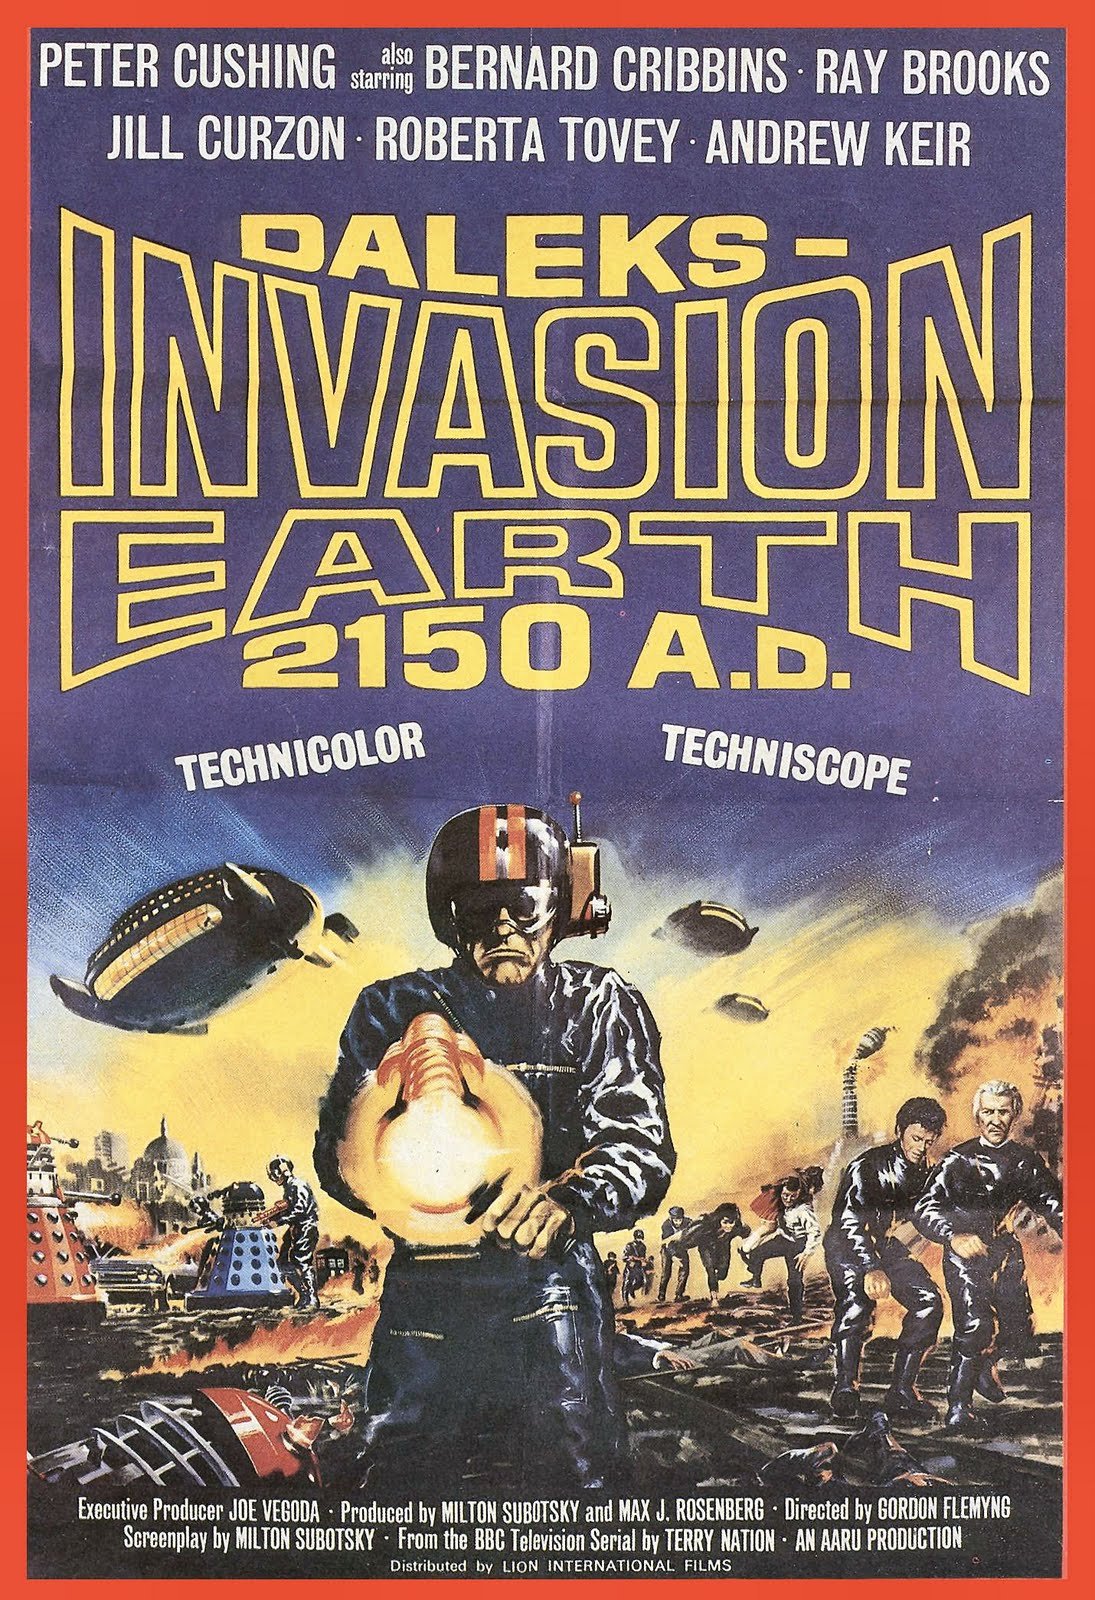 Poster of the movie Daleks' Invasion Earth: 2150 A.D.